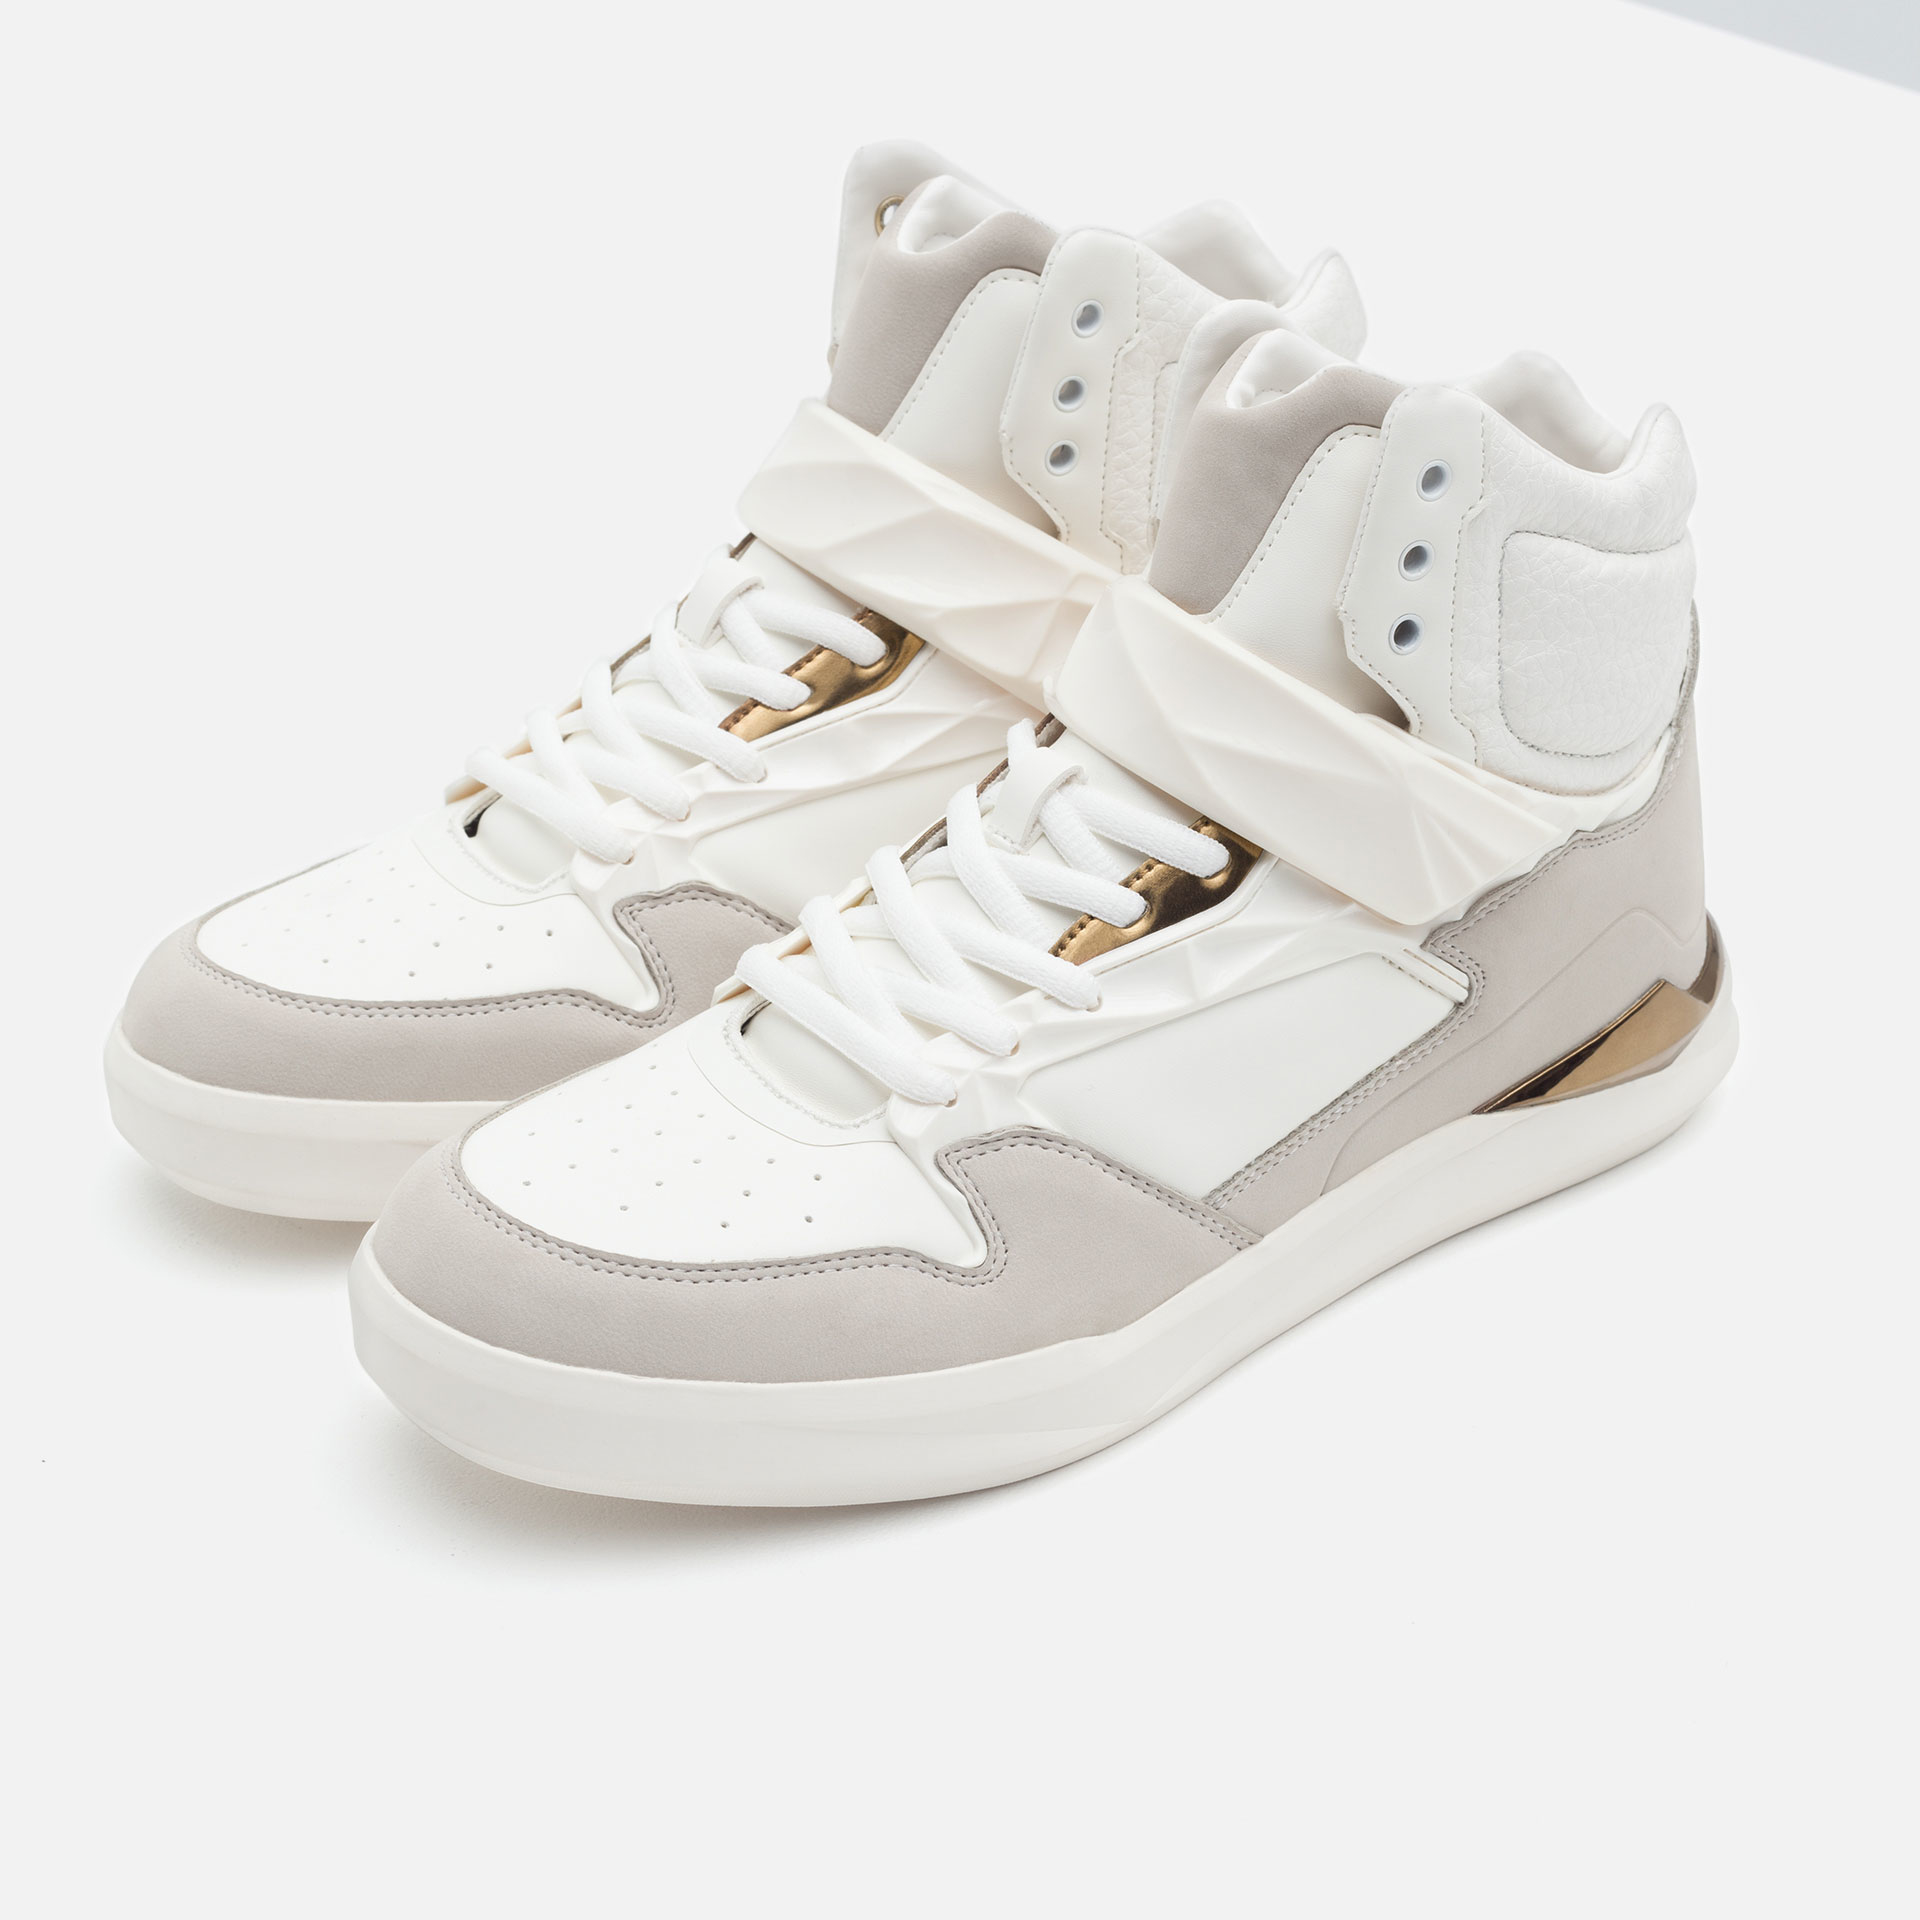 Zara High-top Sneakers With Gold-toned Details in Natural | Lyst